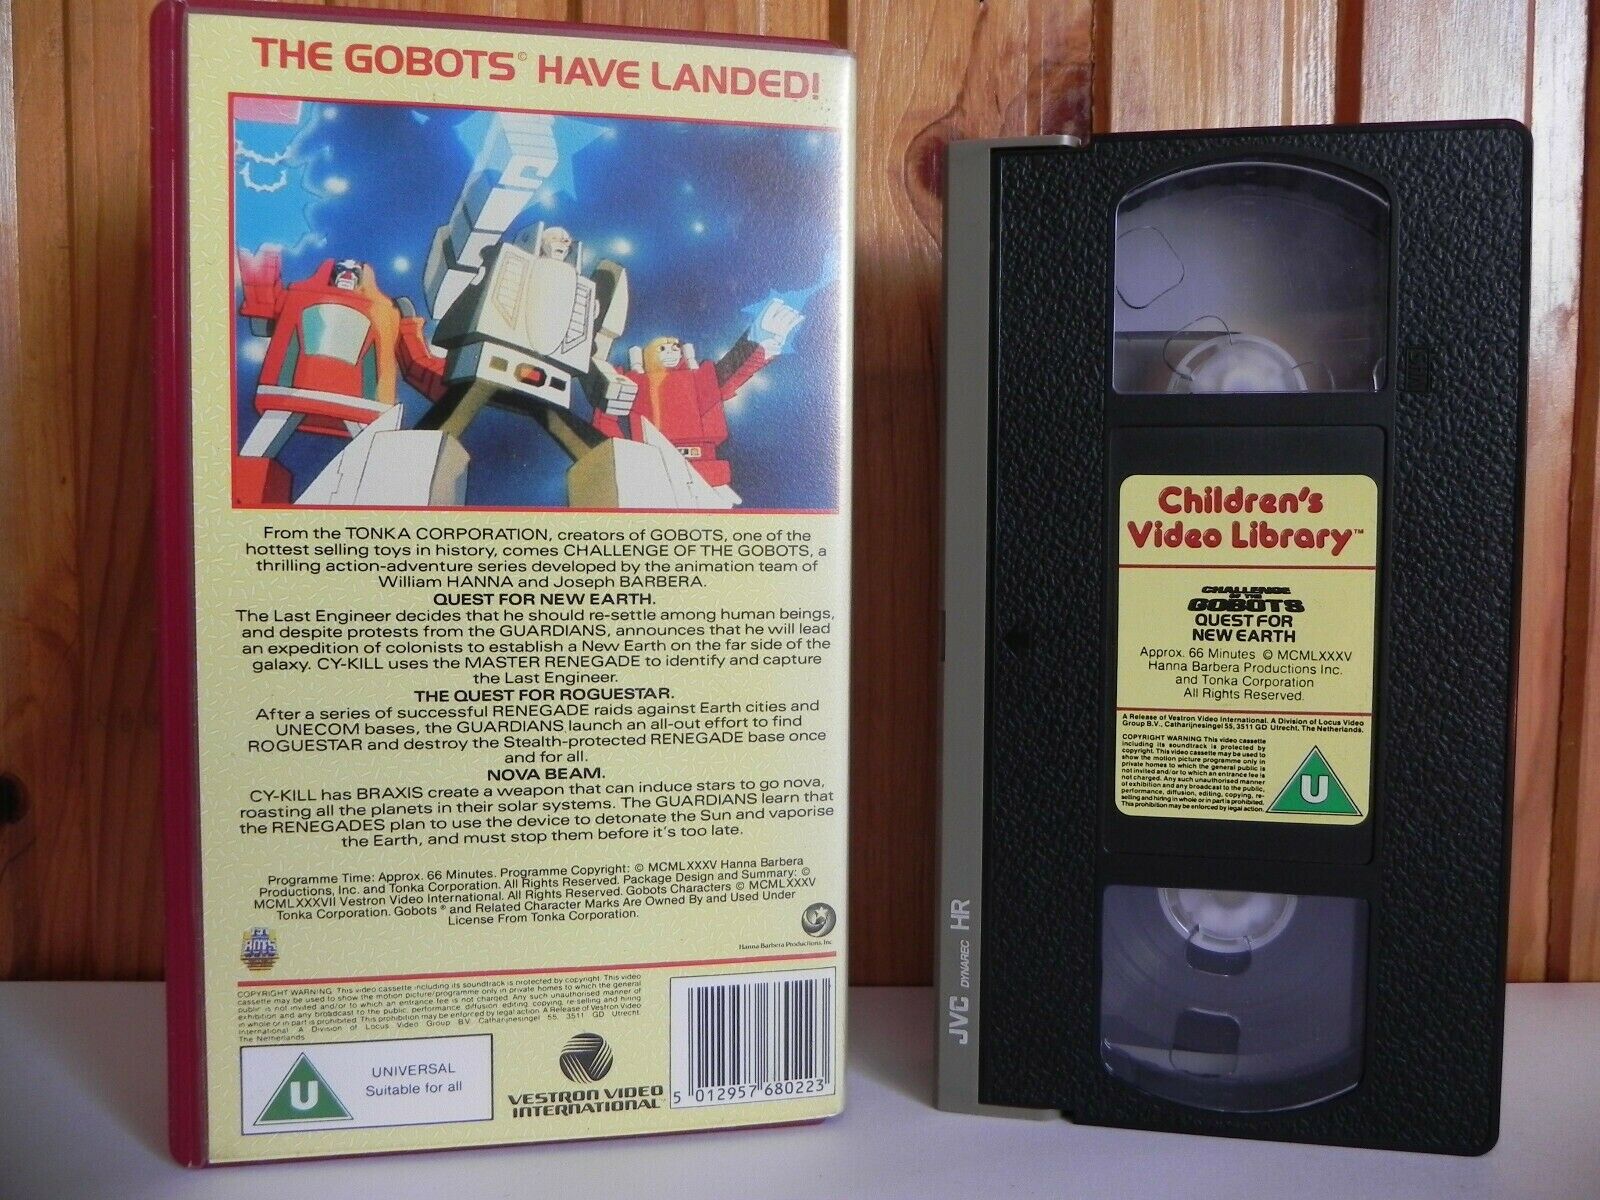 Challenge Of The Gobots - Quest For New Earth - Children's Video Library - VHS-